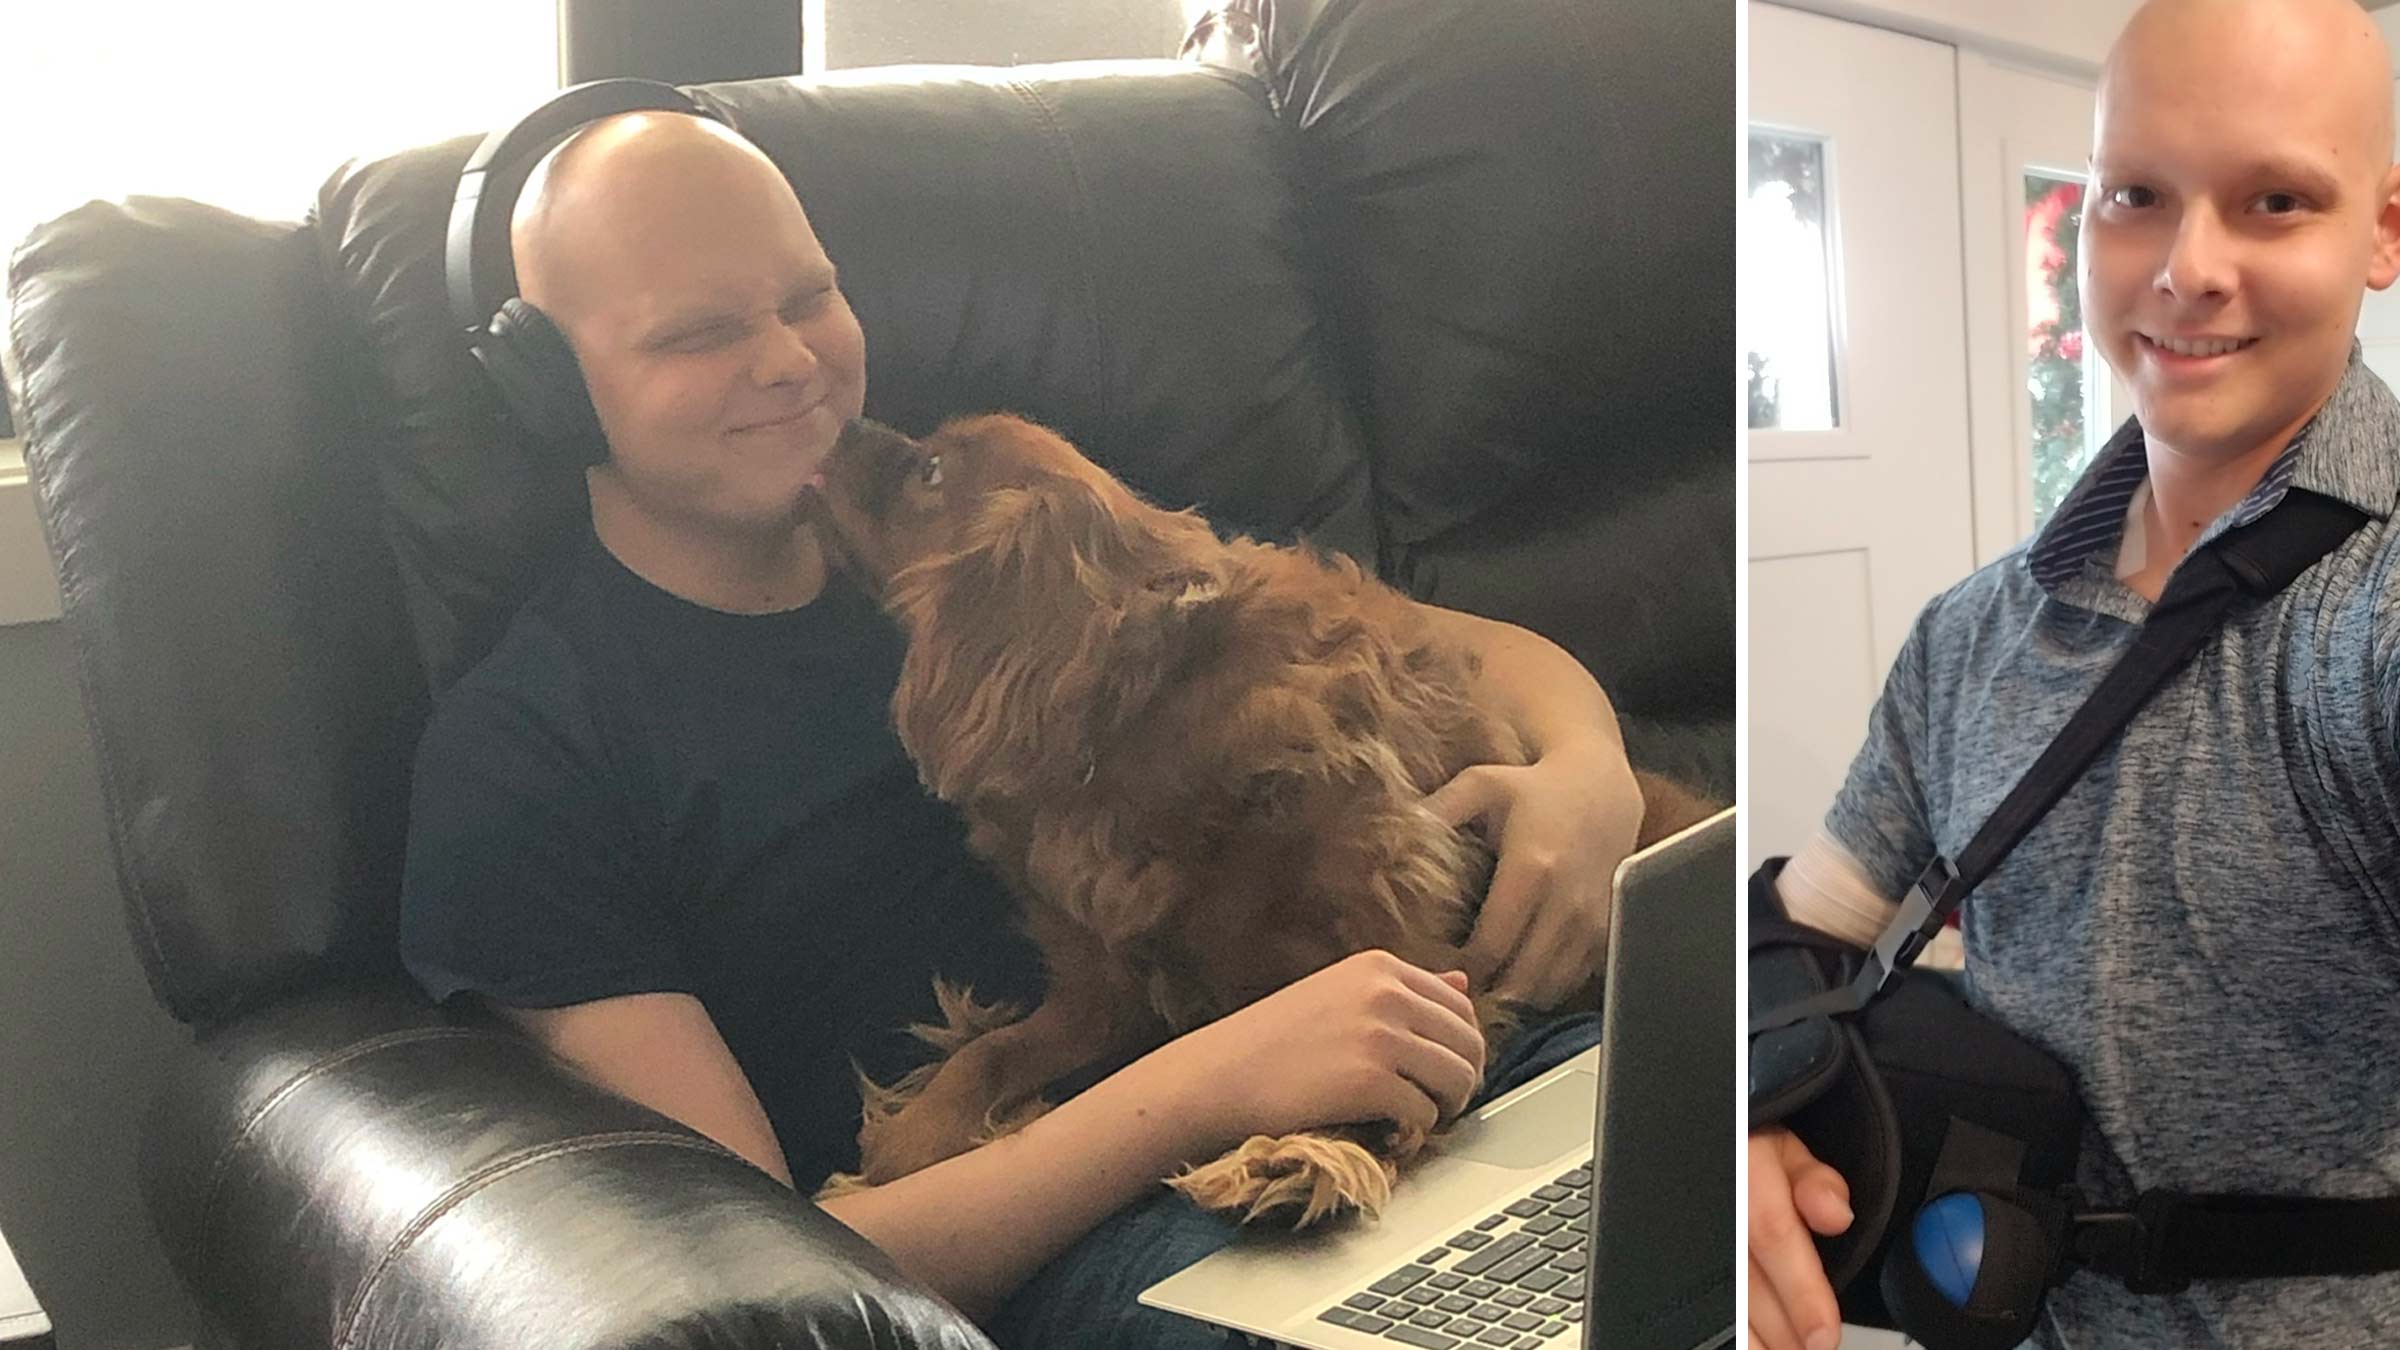 Collage with two photos of Chris Shultz: with his dog in front of a laptop, and with an arm in a sling